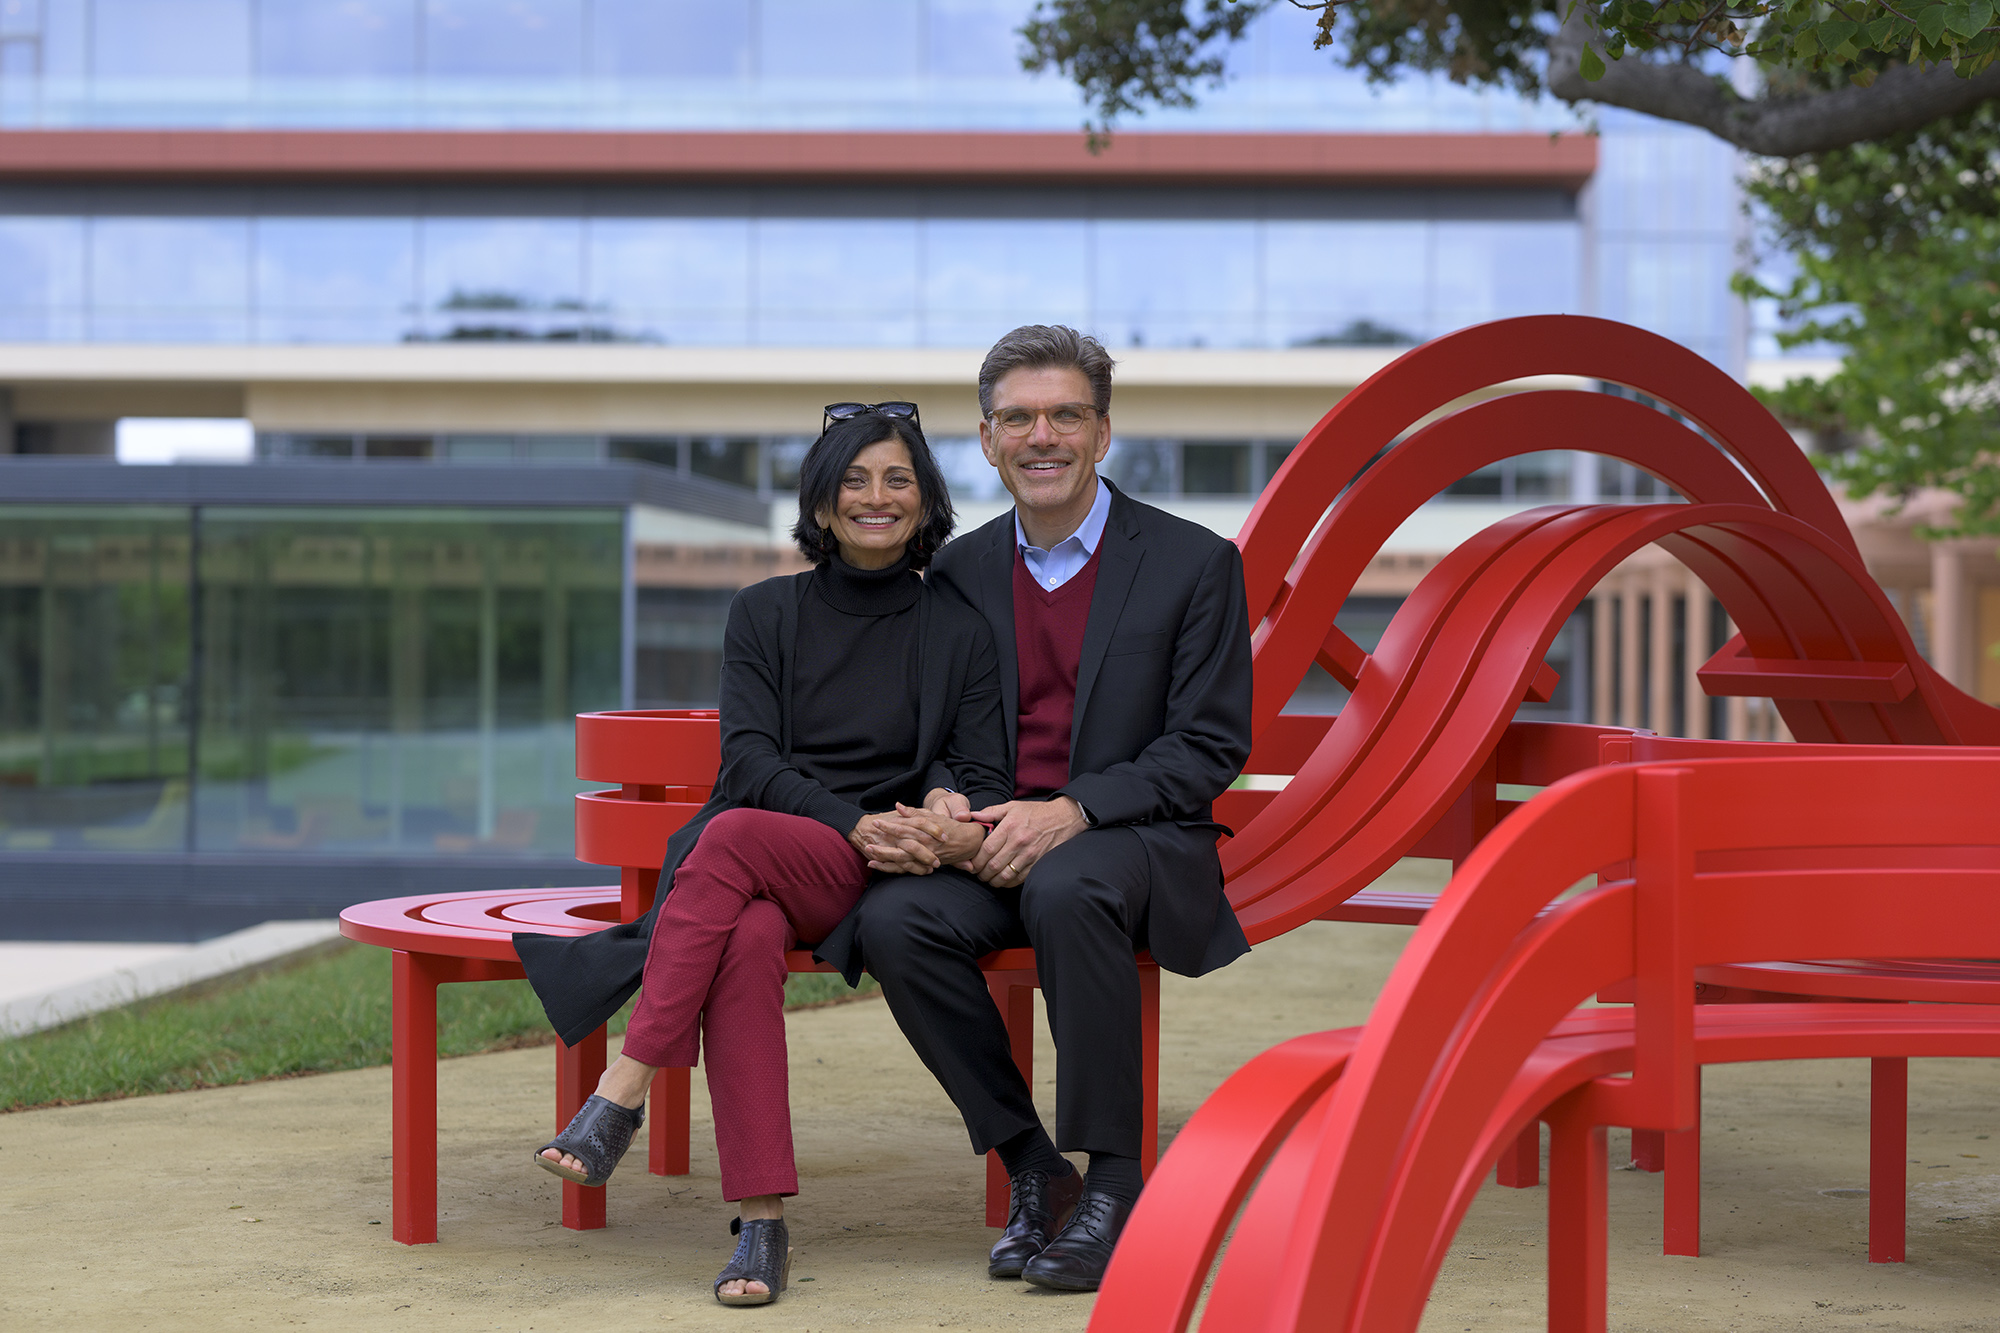 Priya Junnar and President Hiram Chodosh sit together on the benches. Behind them is the Kube and Kravis Center.